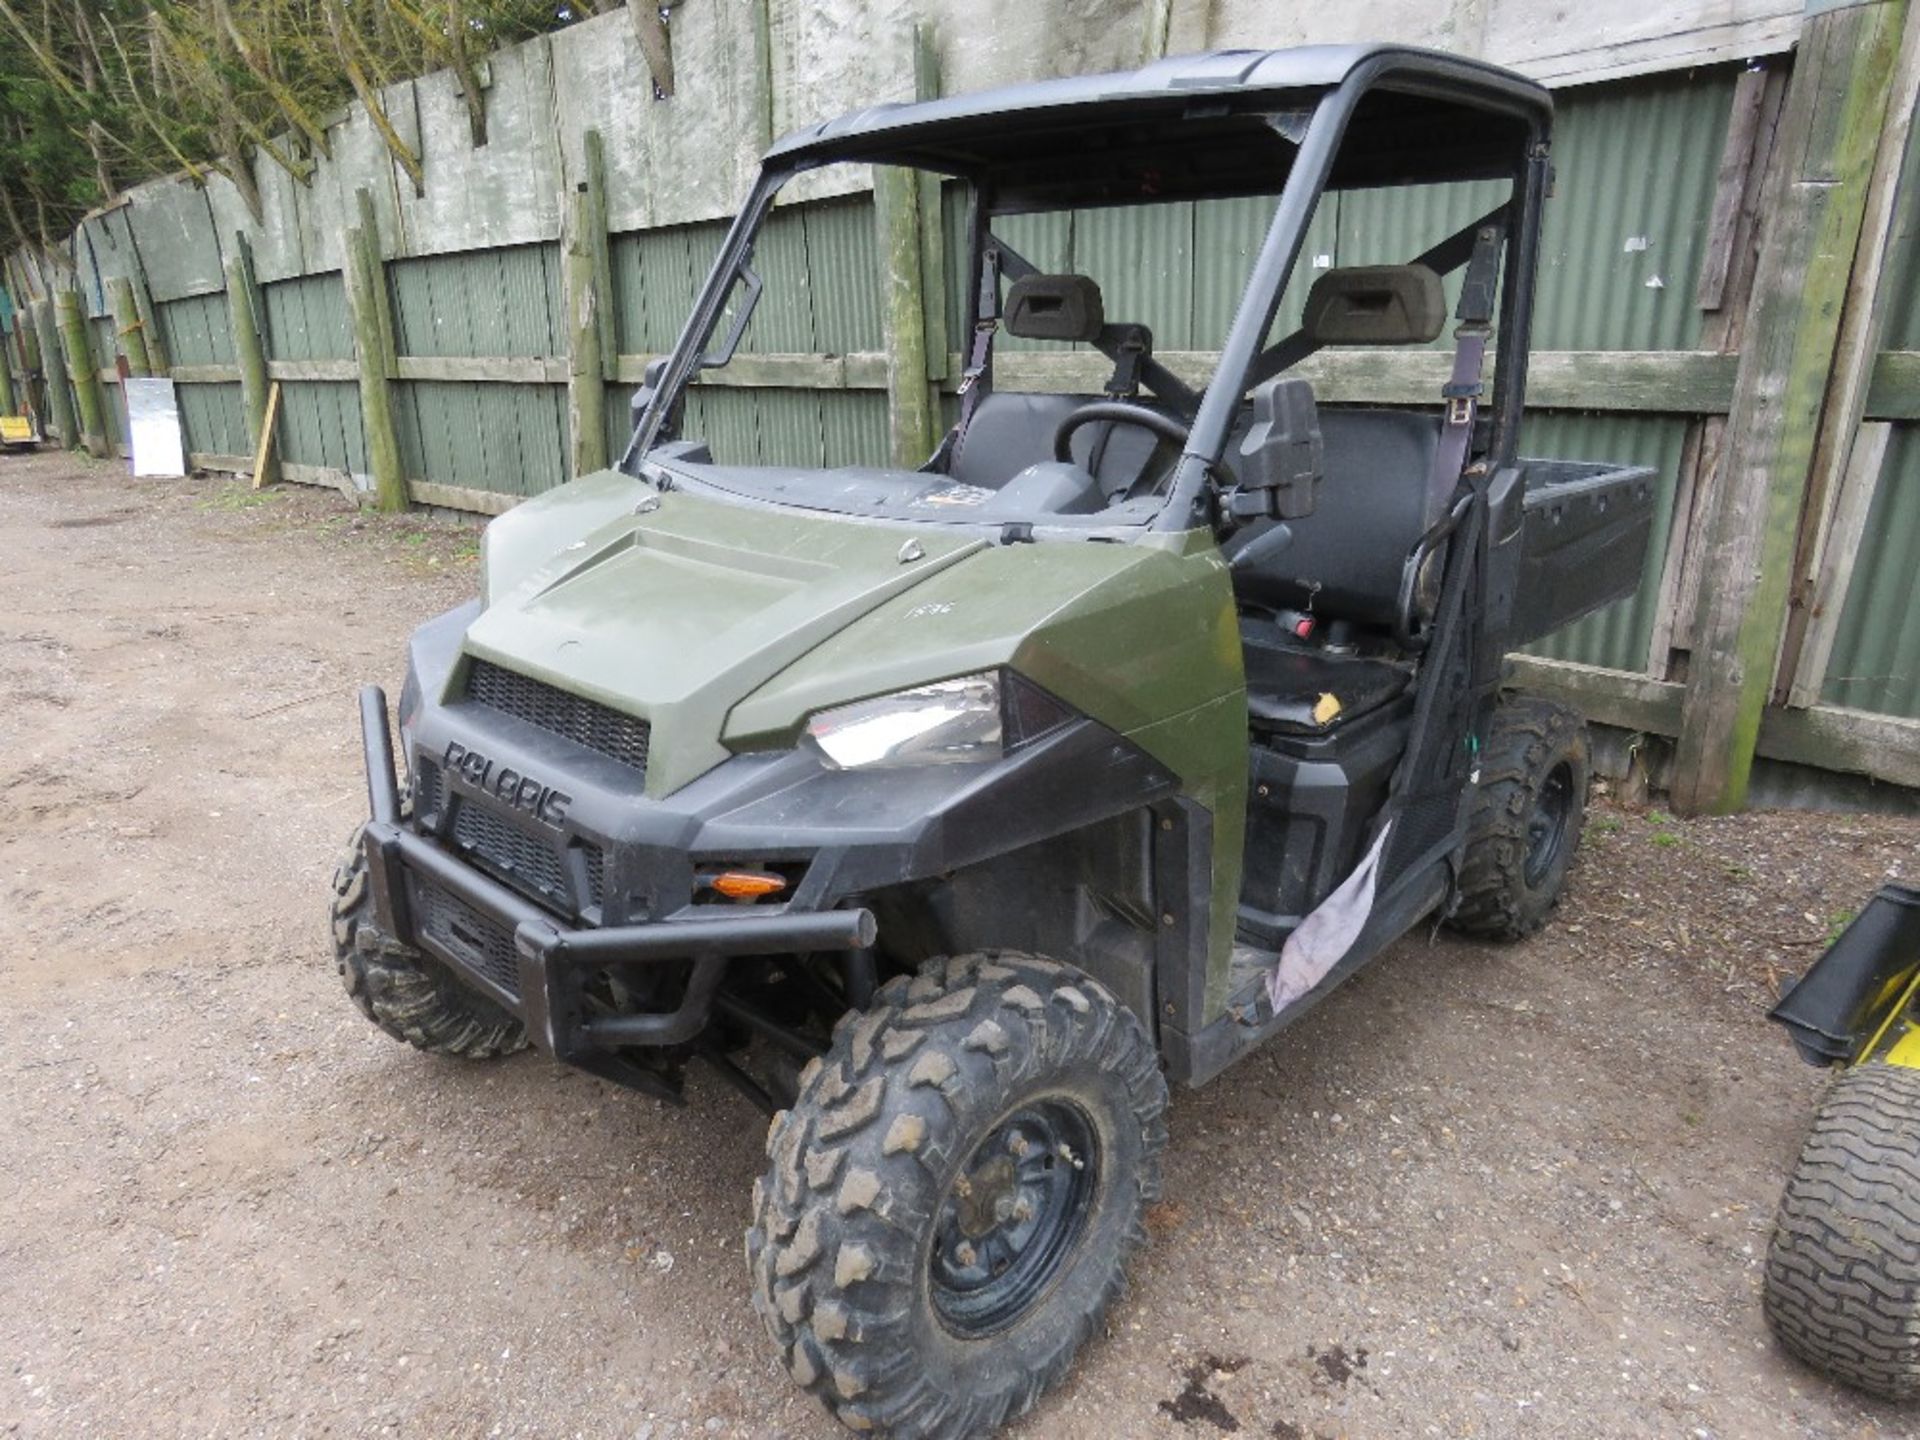 POLARIS RANGER DIESEL RTV REG:EU65 CLO. WHEN TESTED WAS SEEN TO DRIVE, STEER AND BRAKE......REQUIRES